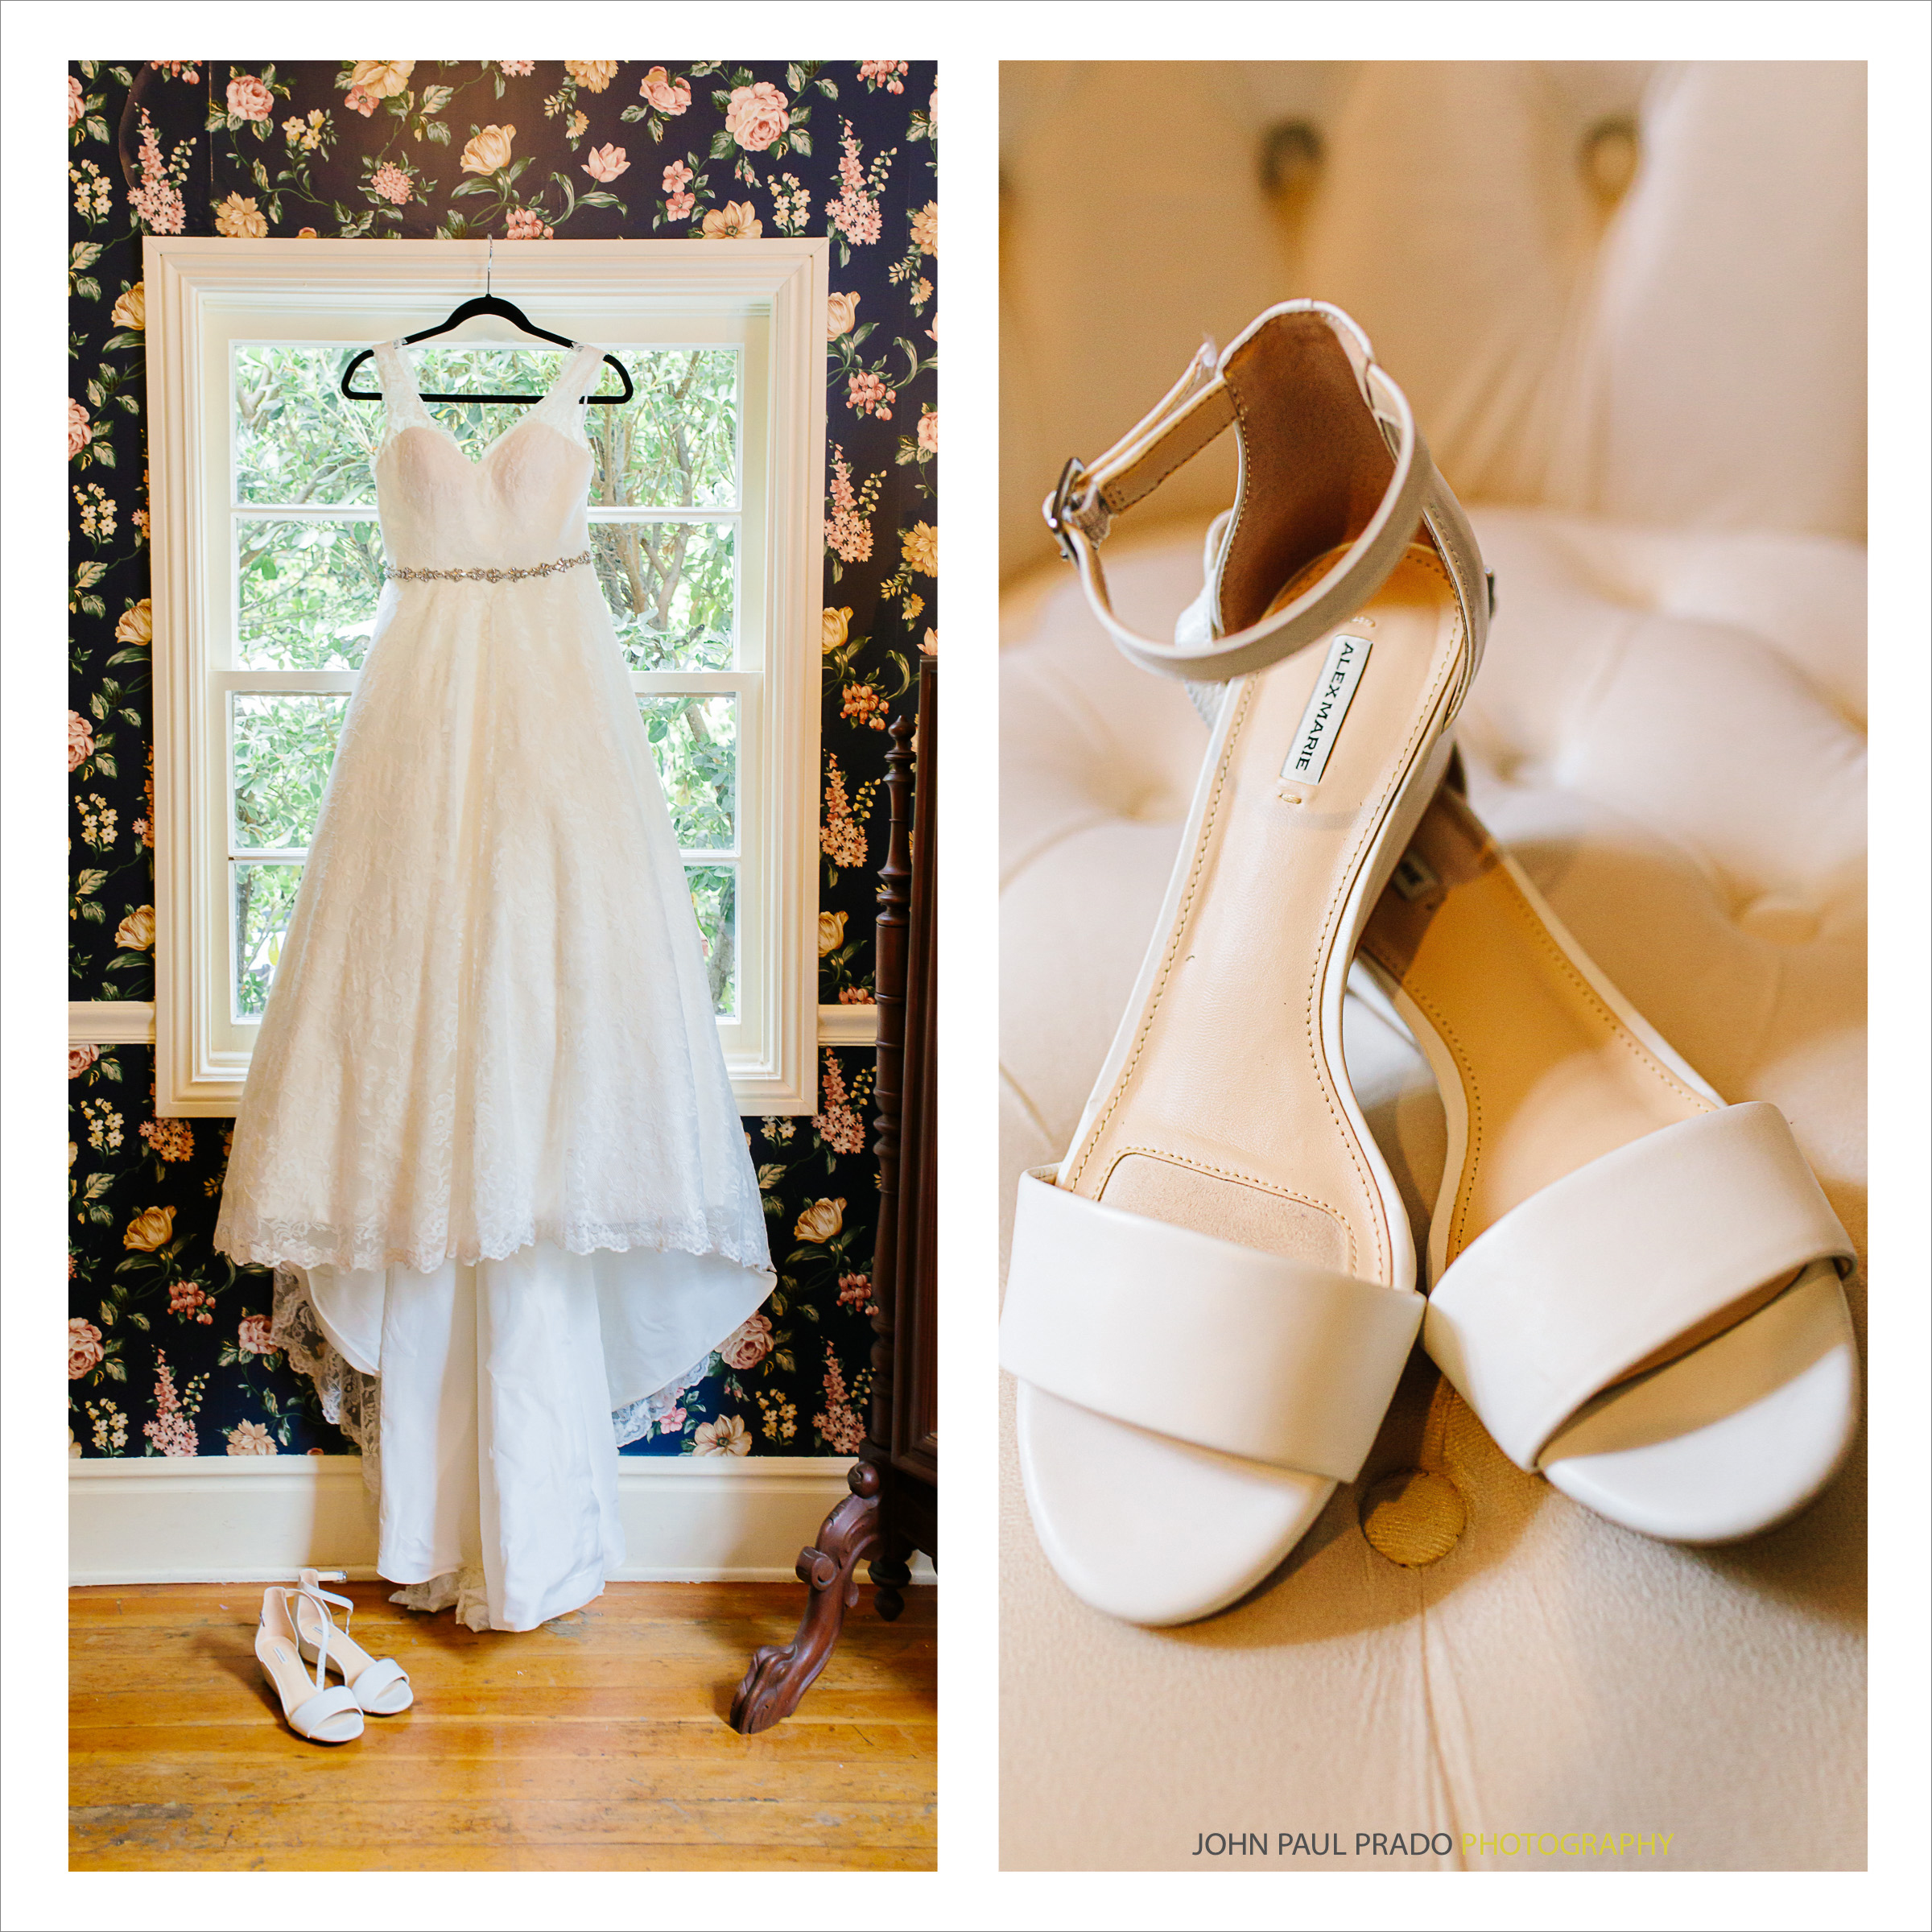 Bride's wedding dress and shoes